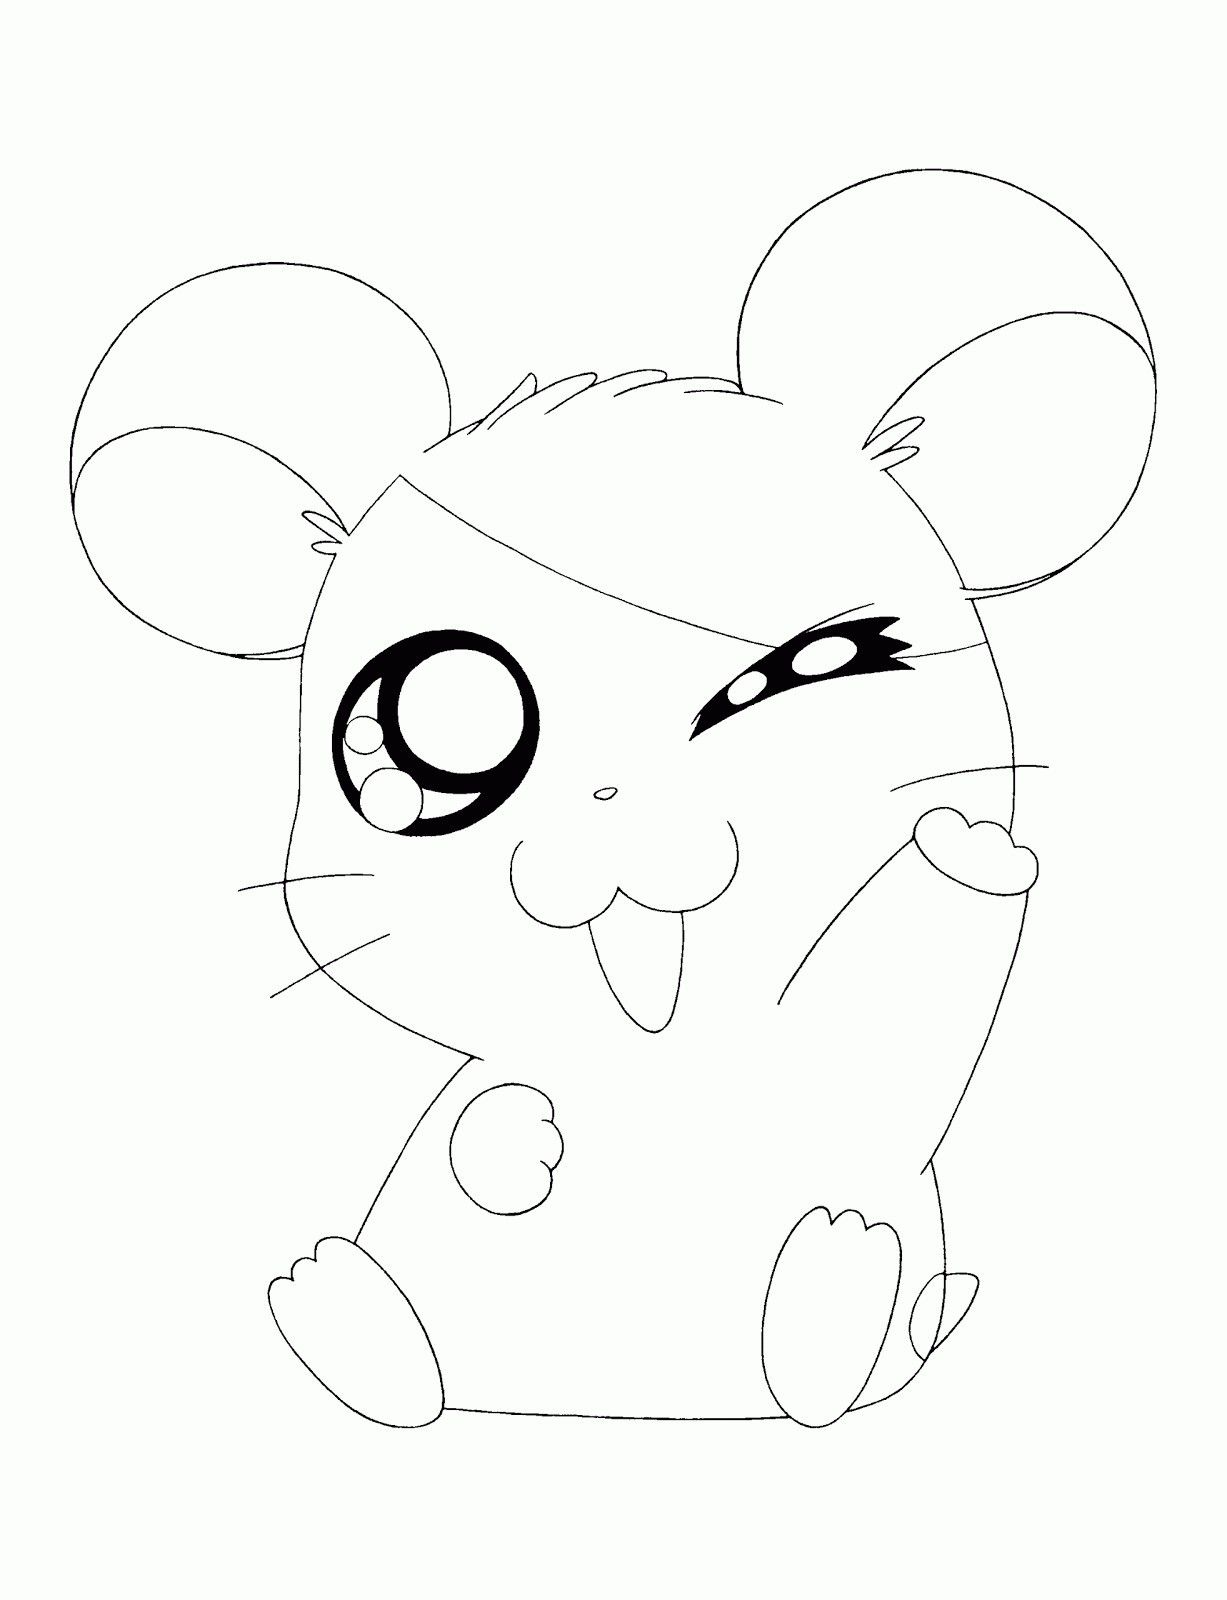 Free Coloring Pages Cute Animals - Coloring